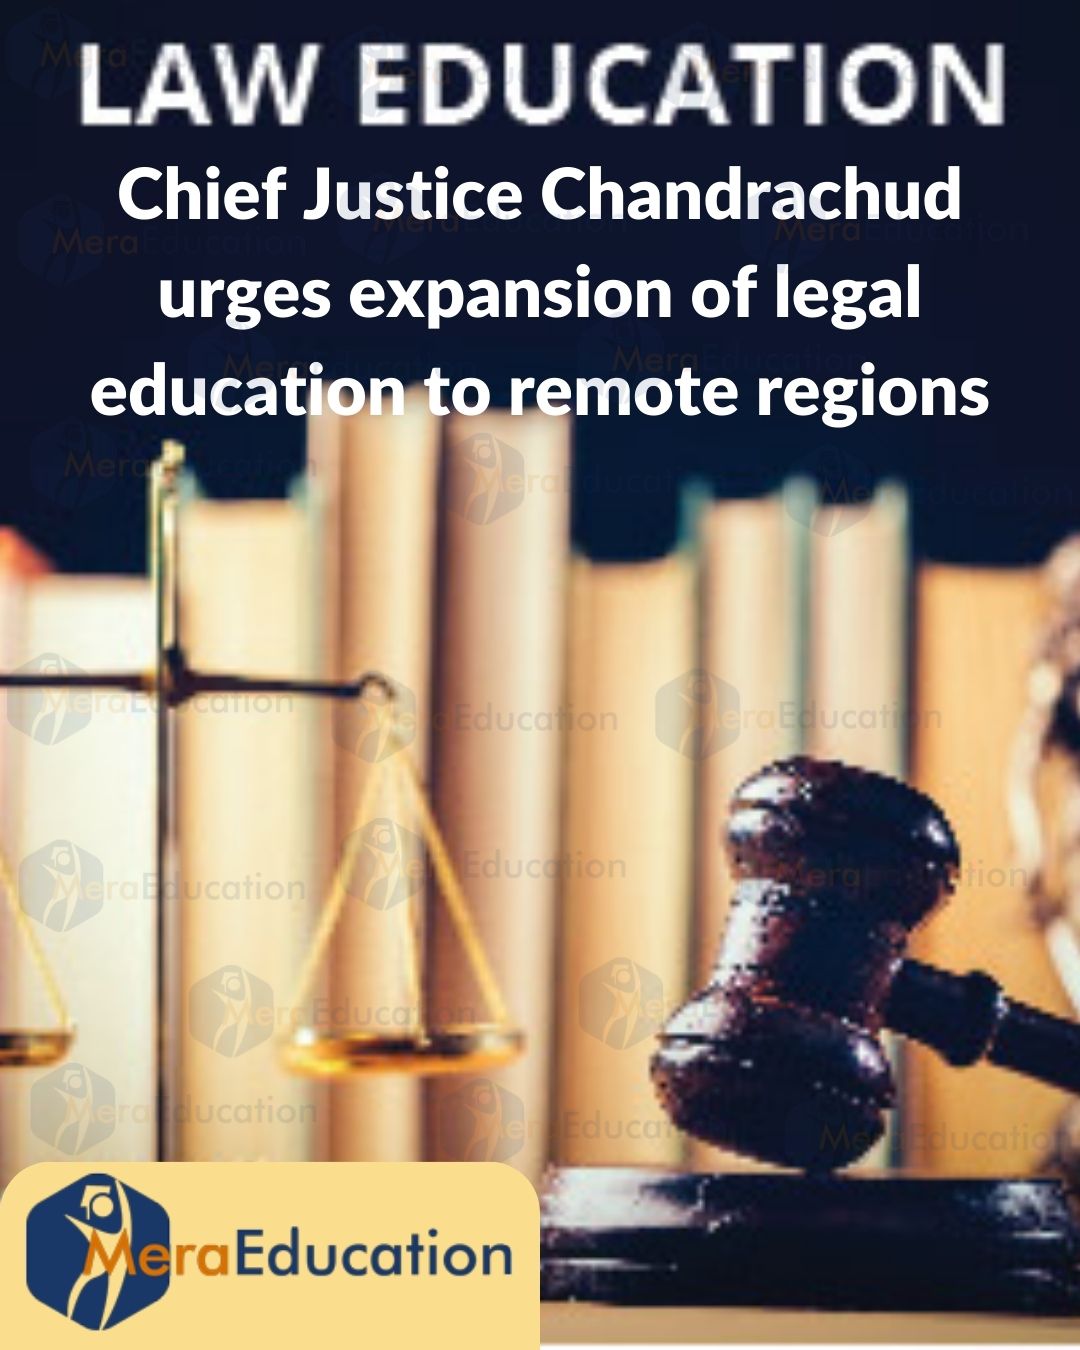 Chief Justice D Y Chandrachud Advocates For Inclusive Legal